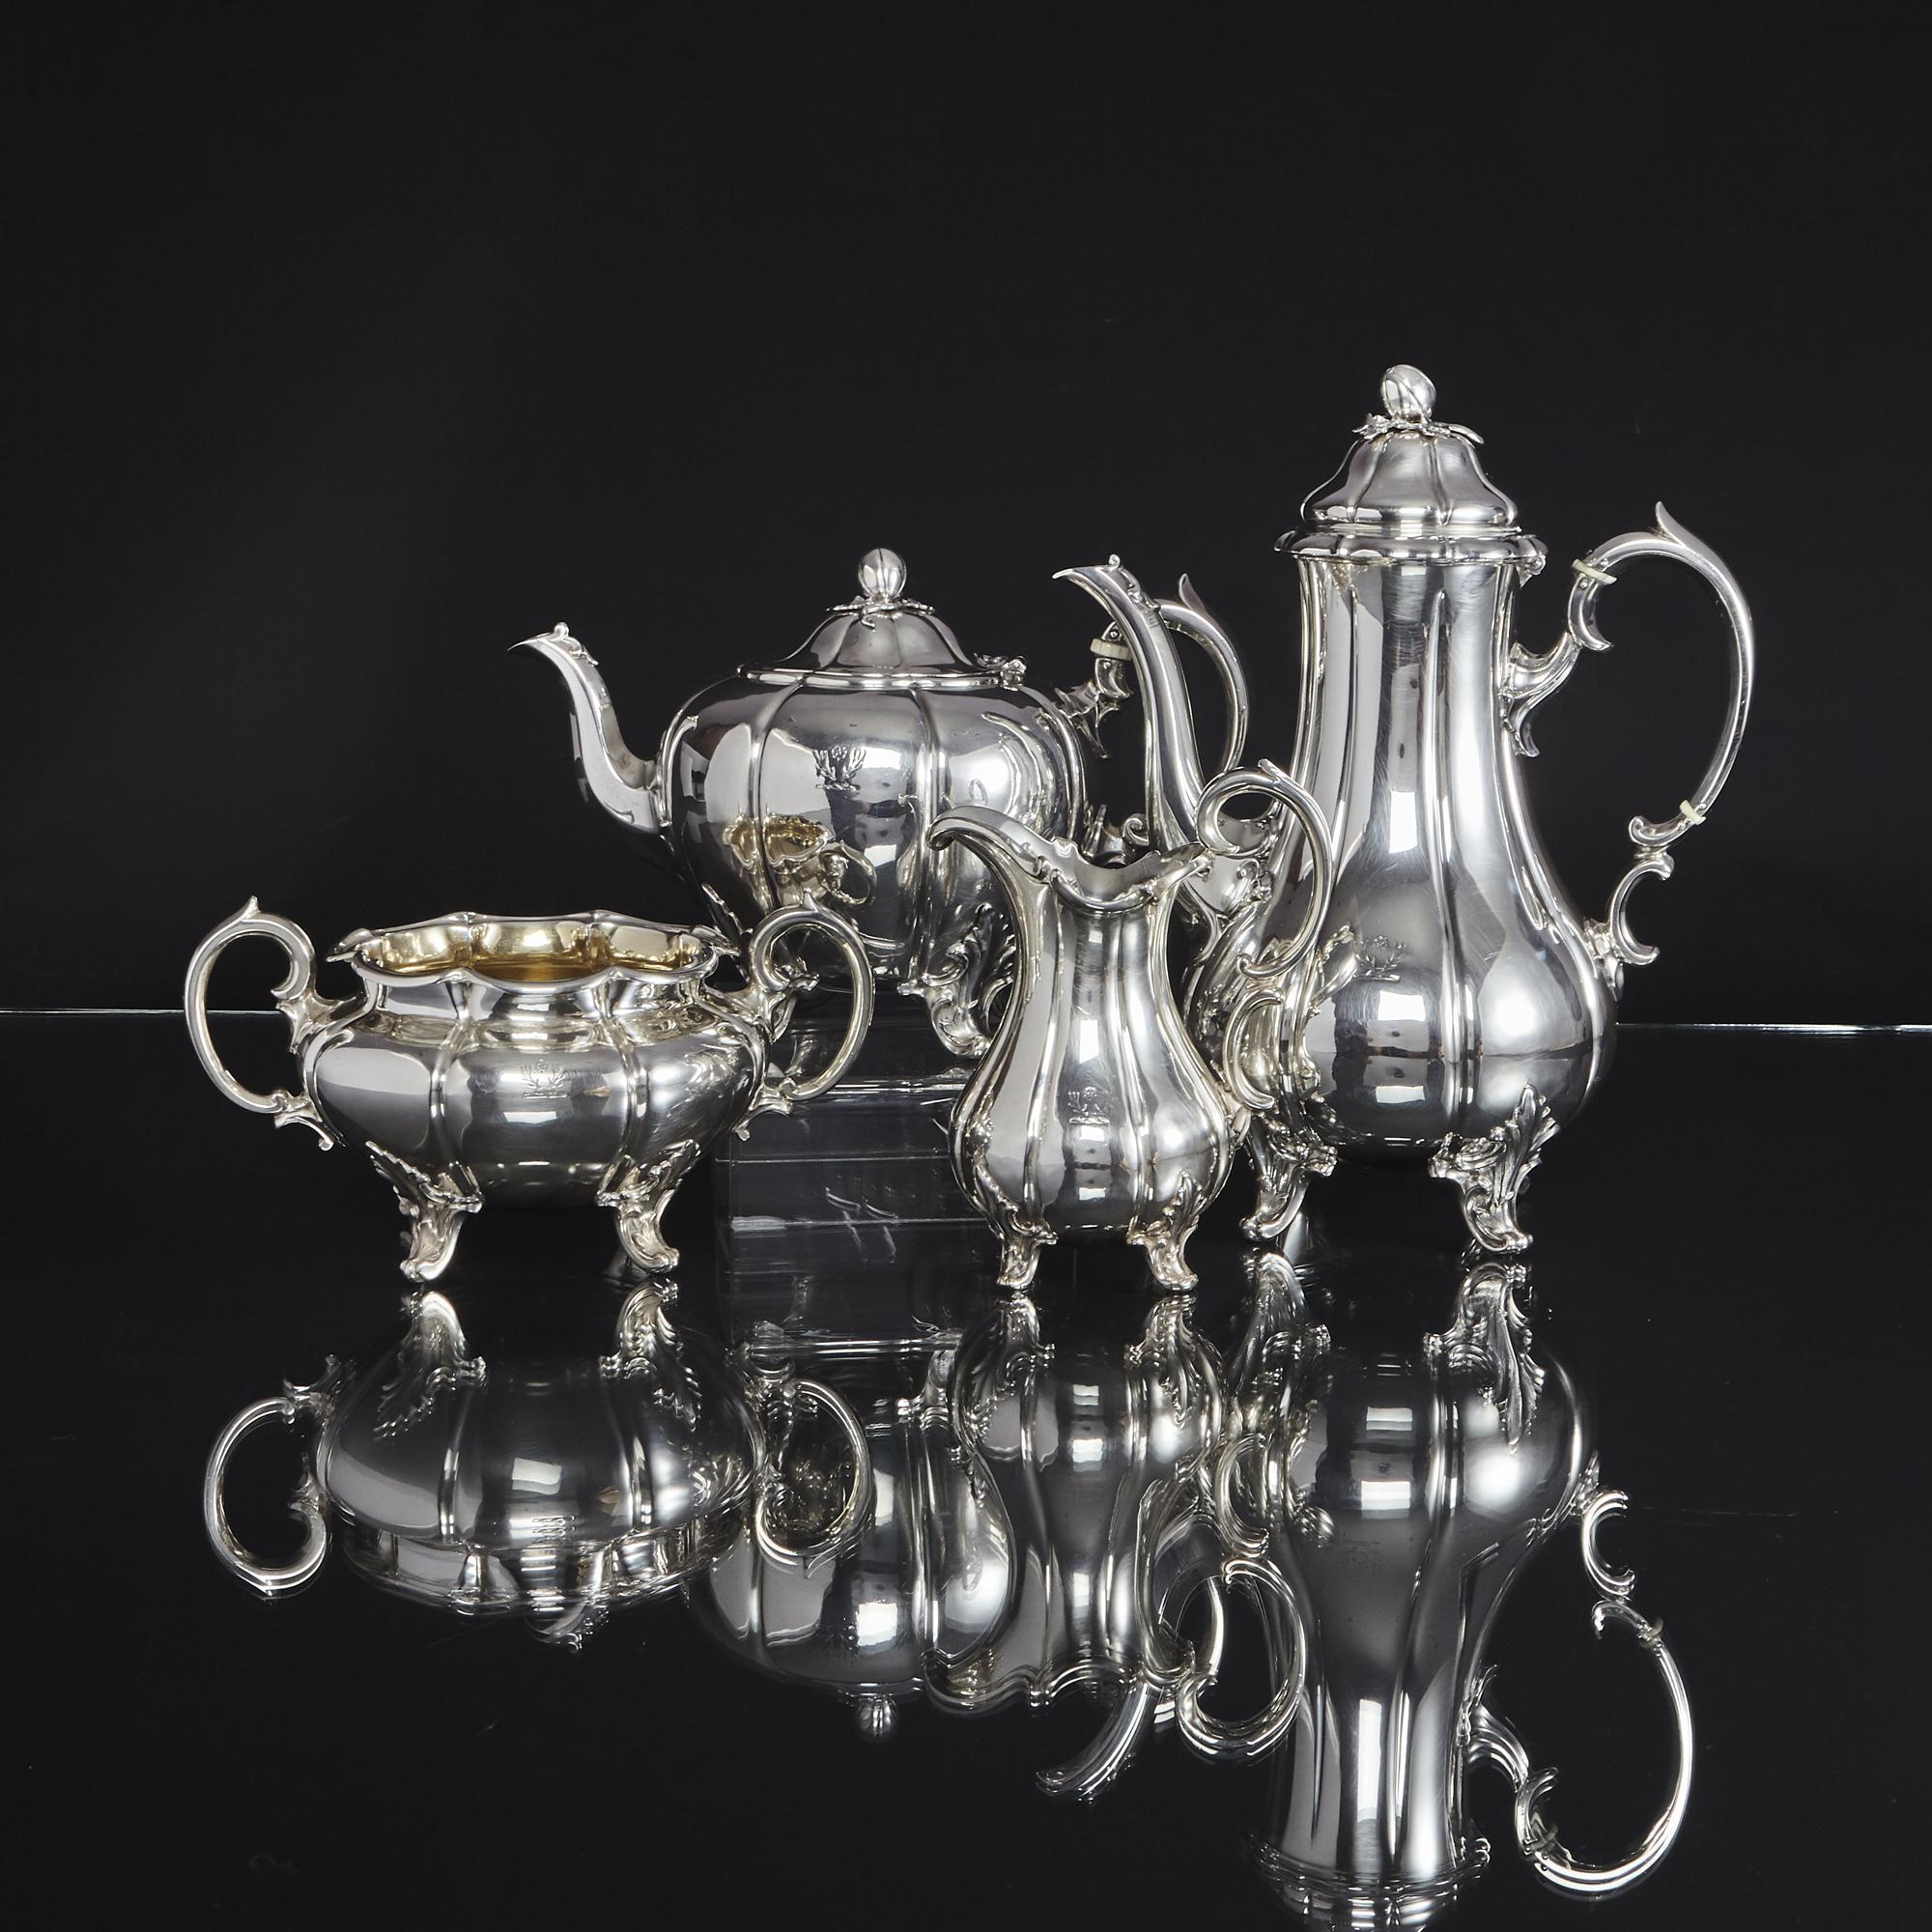 Four Piece Melon Style Silver Tea and Coffee Set For Sale 6